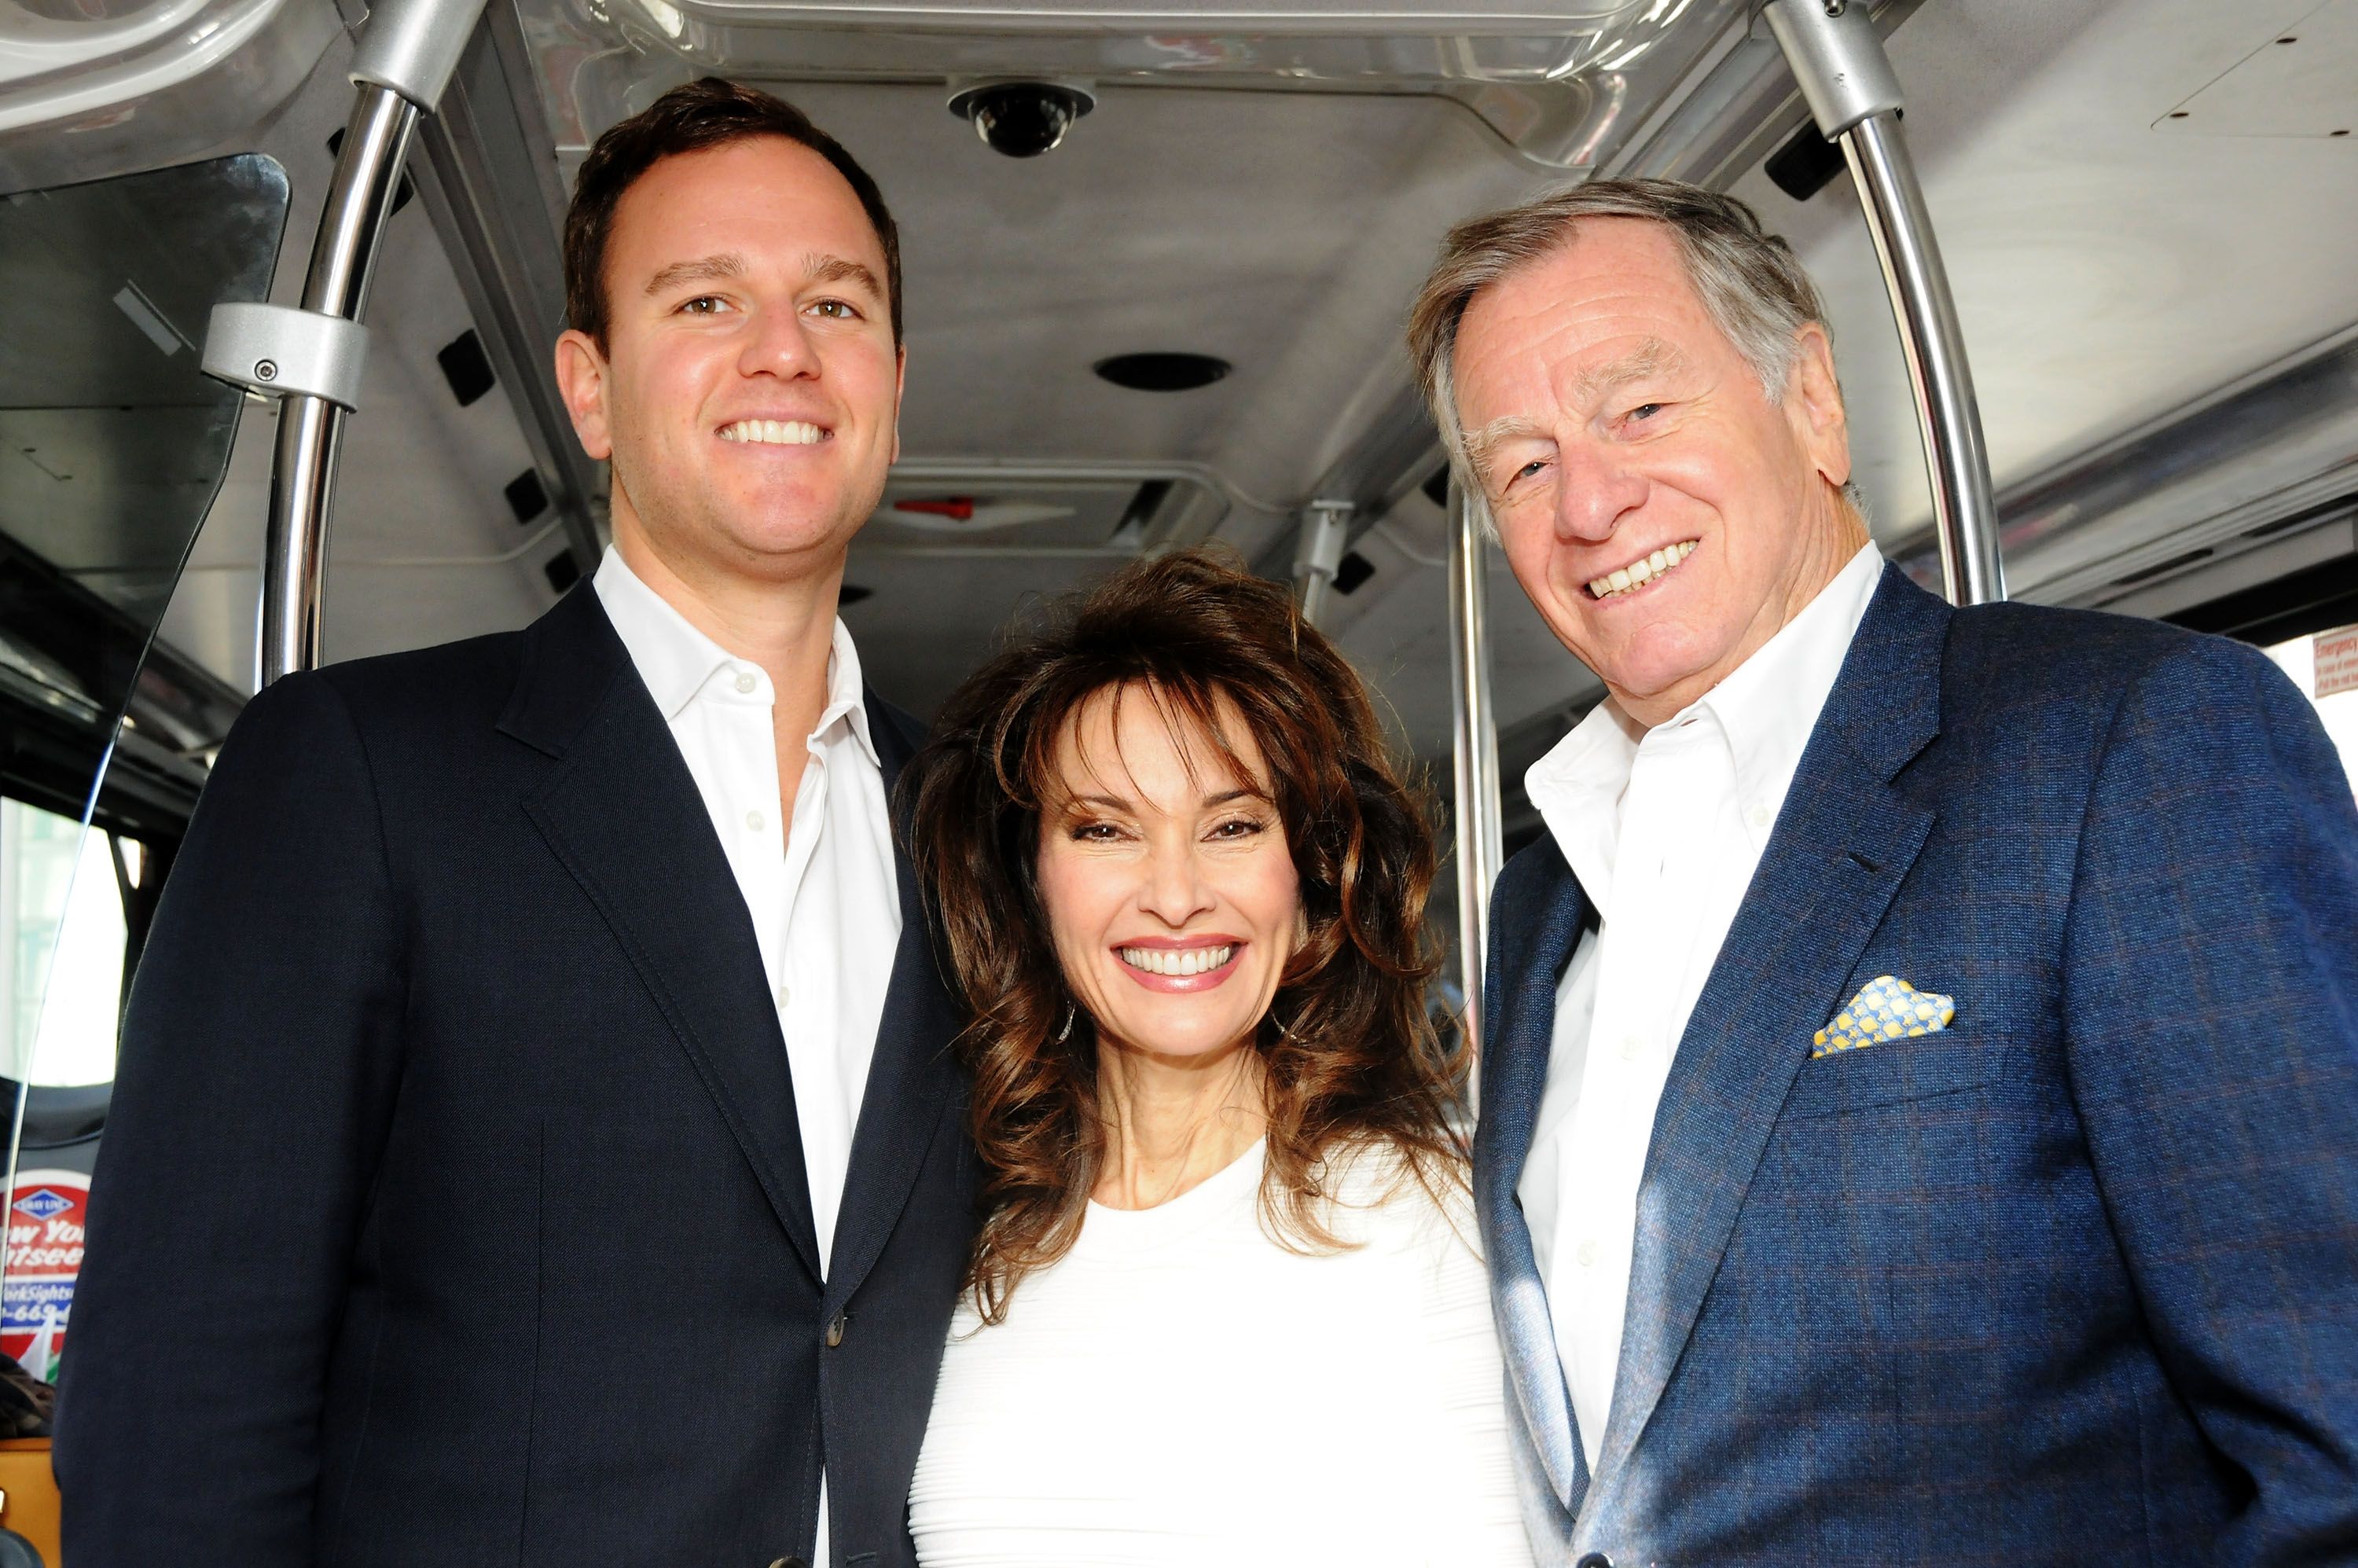 Susan Lucci, Andreas Huber, and Helmut Huber during the Gray Line New York's Ride Of Fame Honors Susan Lucci at Pier 78 on November 19, 2013 in New York City. | Source: Getty Images